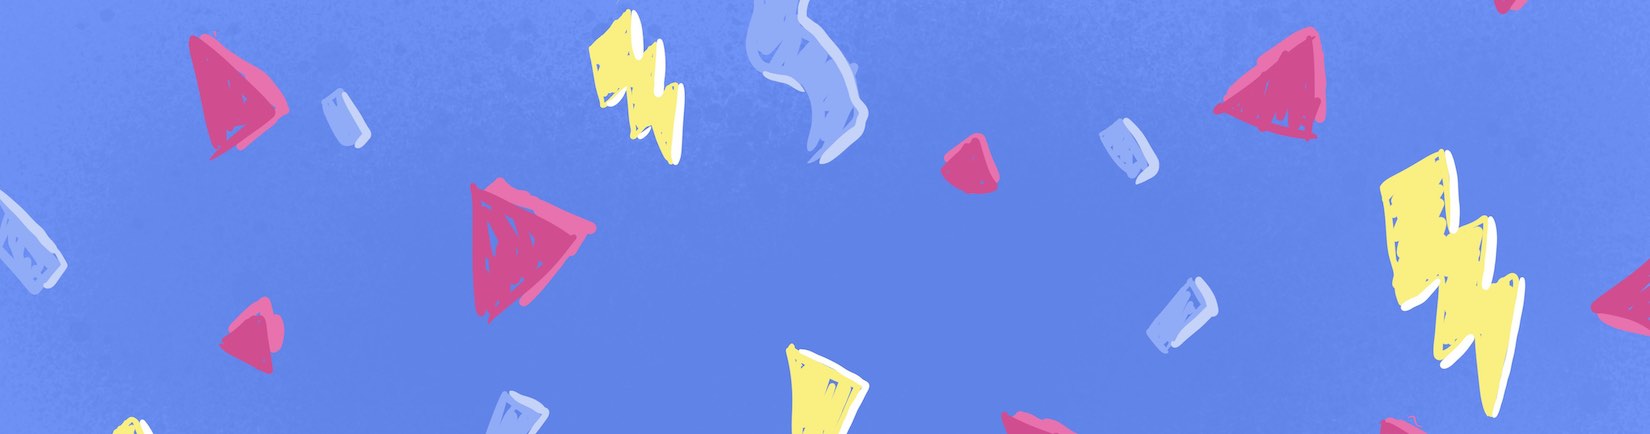 Cool hand-drawn 80s-style banner image with lightning bolts, confetti, and other shapes